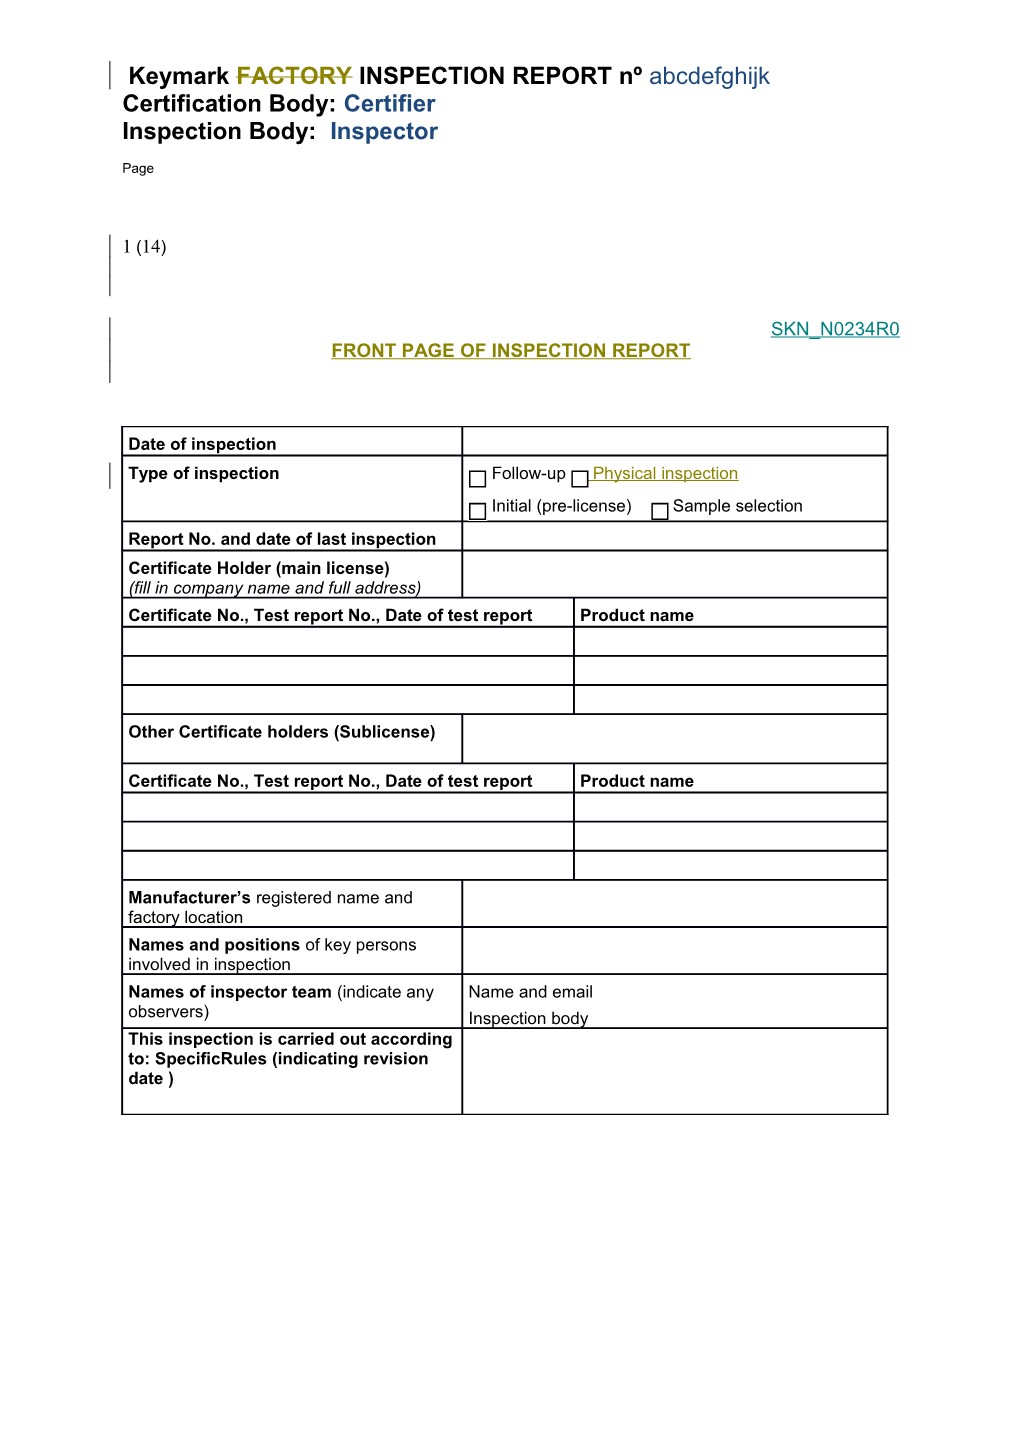 Front Page of Inspection Report